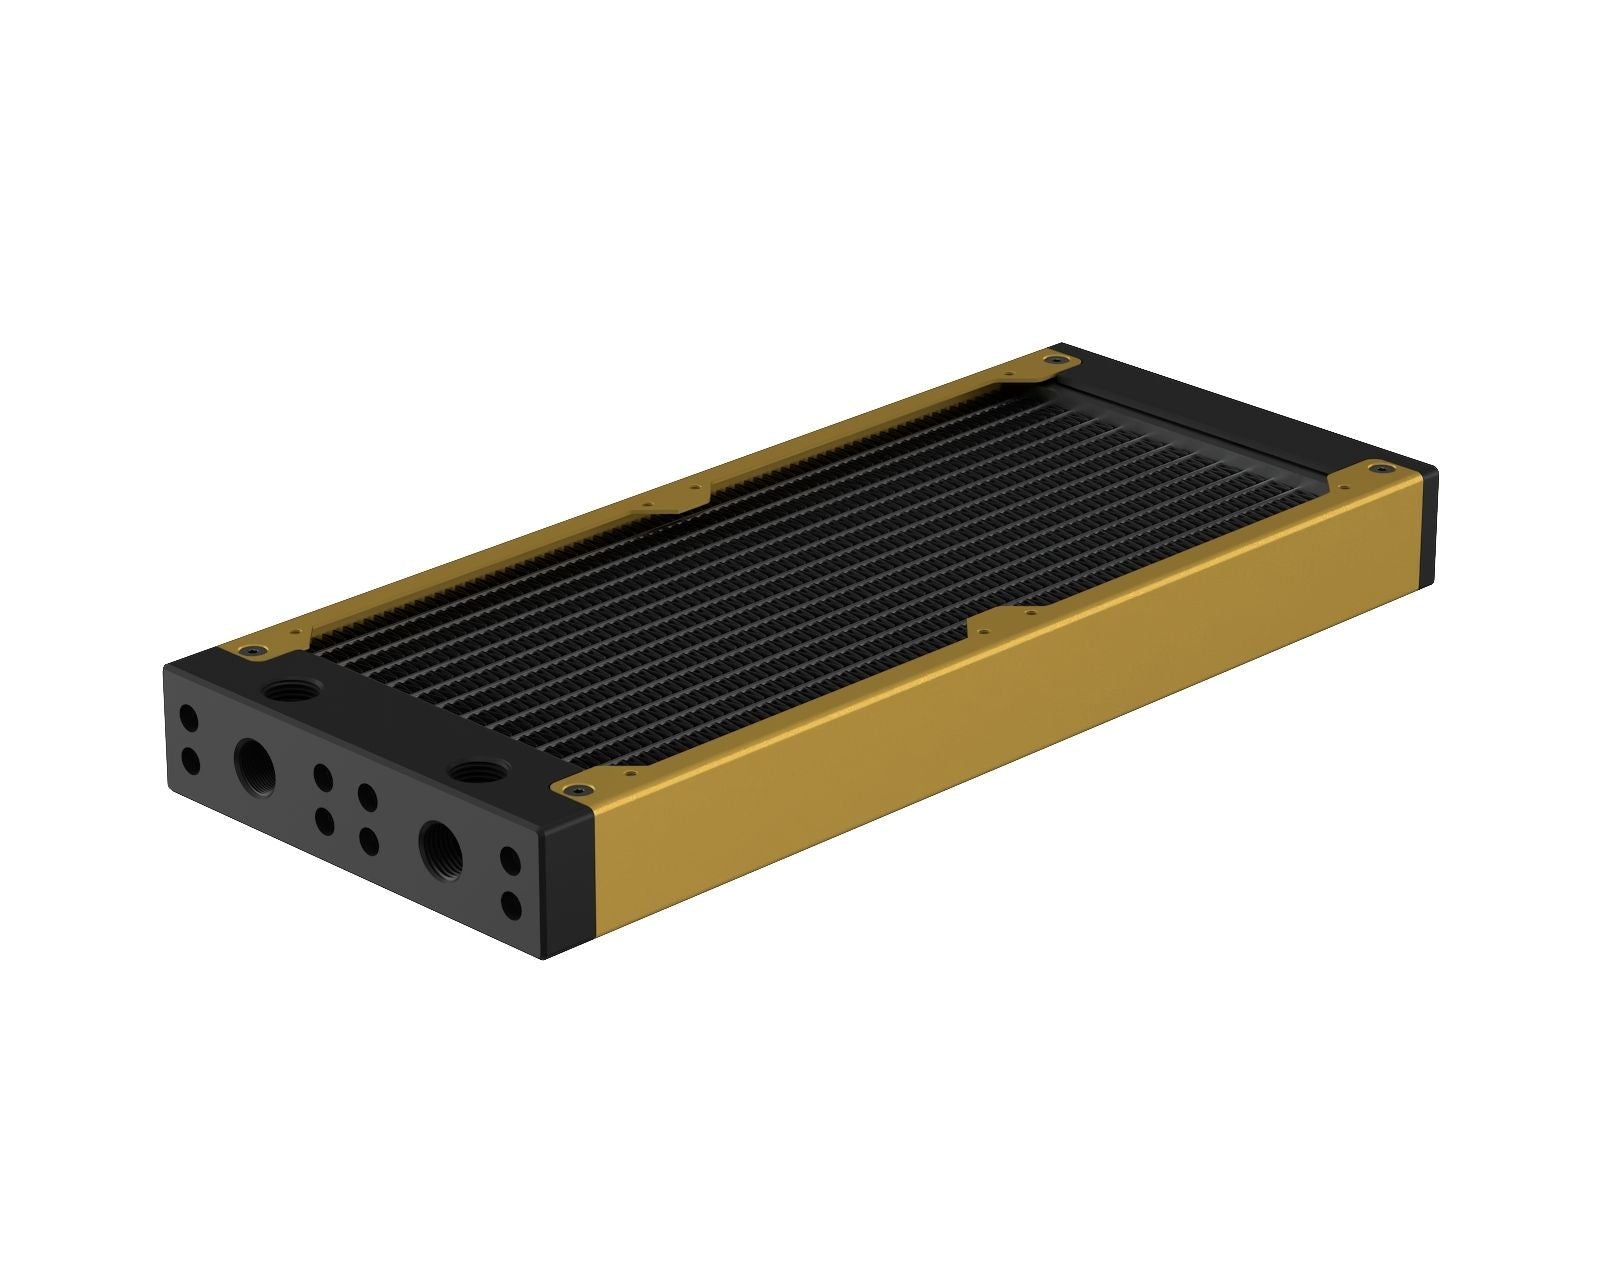 PrimoChill 240SL (30mm) EXIMO Modular Radiator, Black POM, 2x120mm, Dual Fan (R-SL-BK24) Available in 20+ Colors, Assembled in USA and Custom Watercooling Loop Ready - Gold